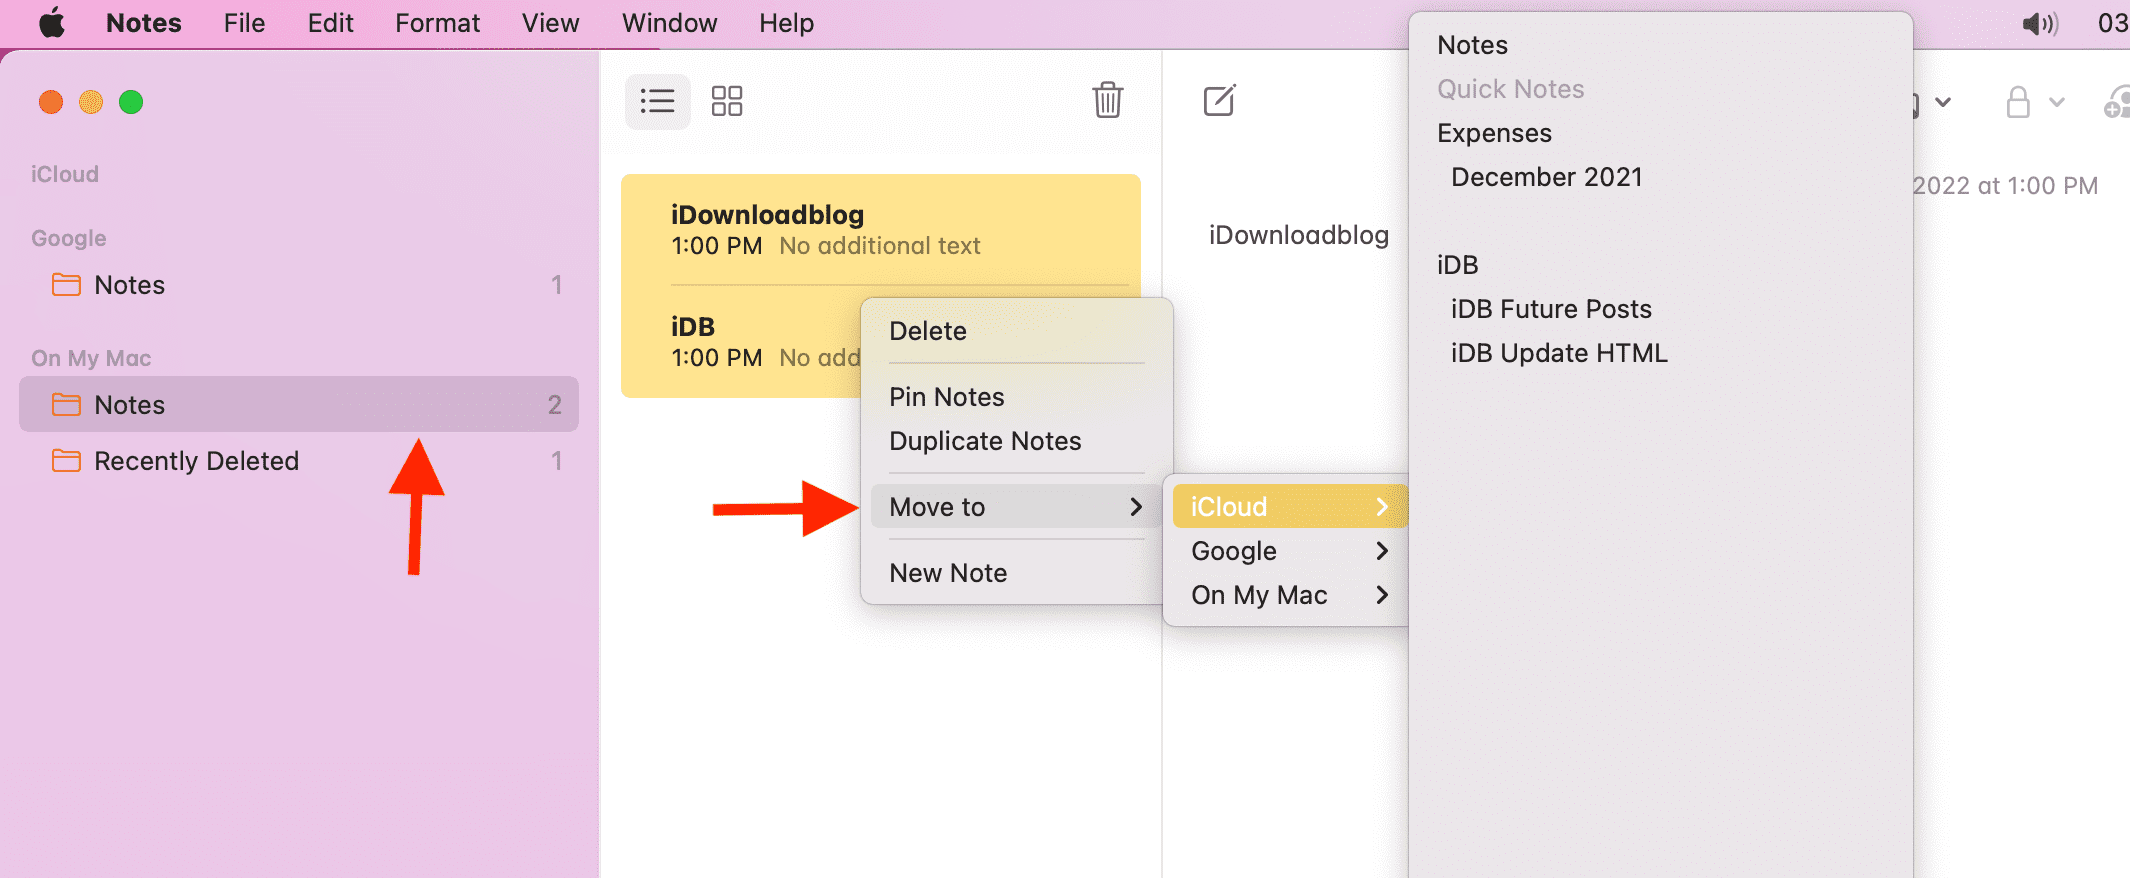 Move On My Mac notes to iCloud